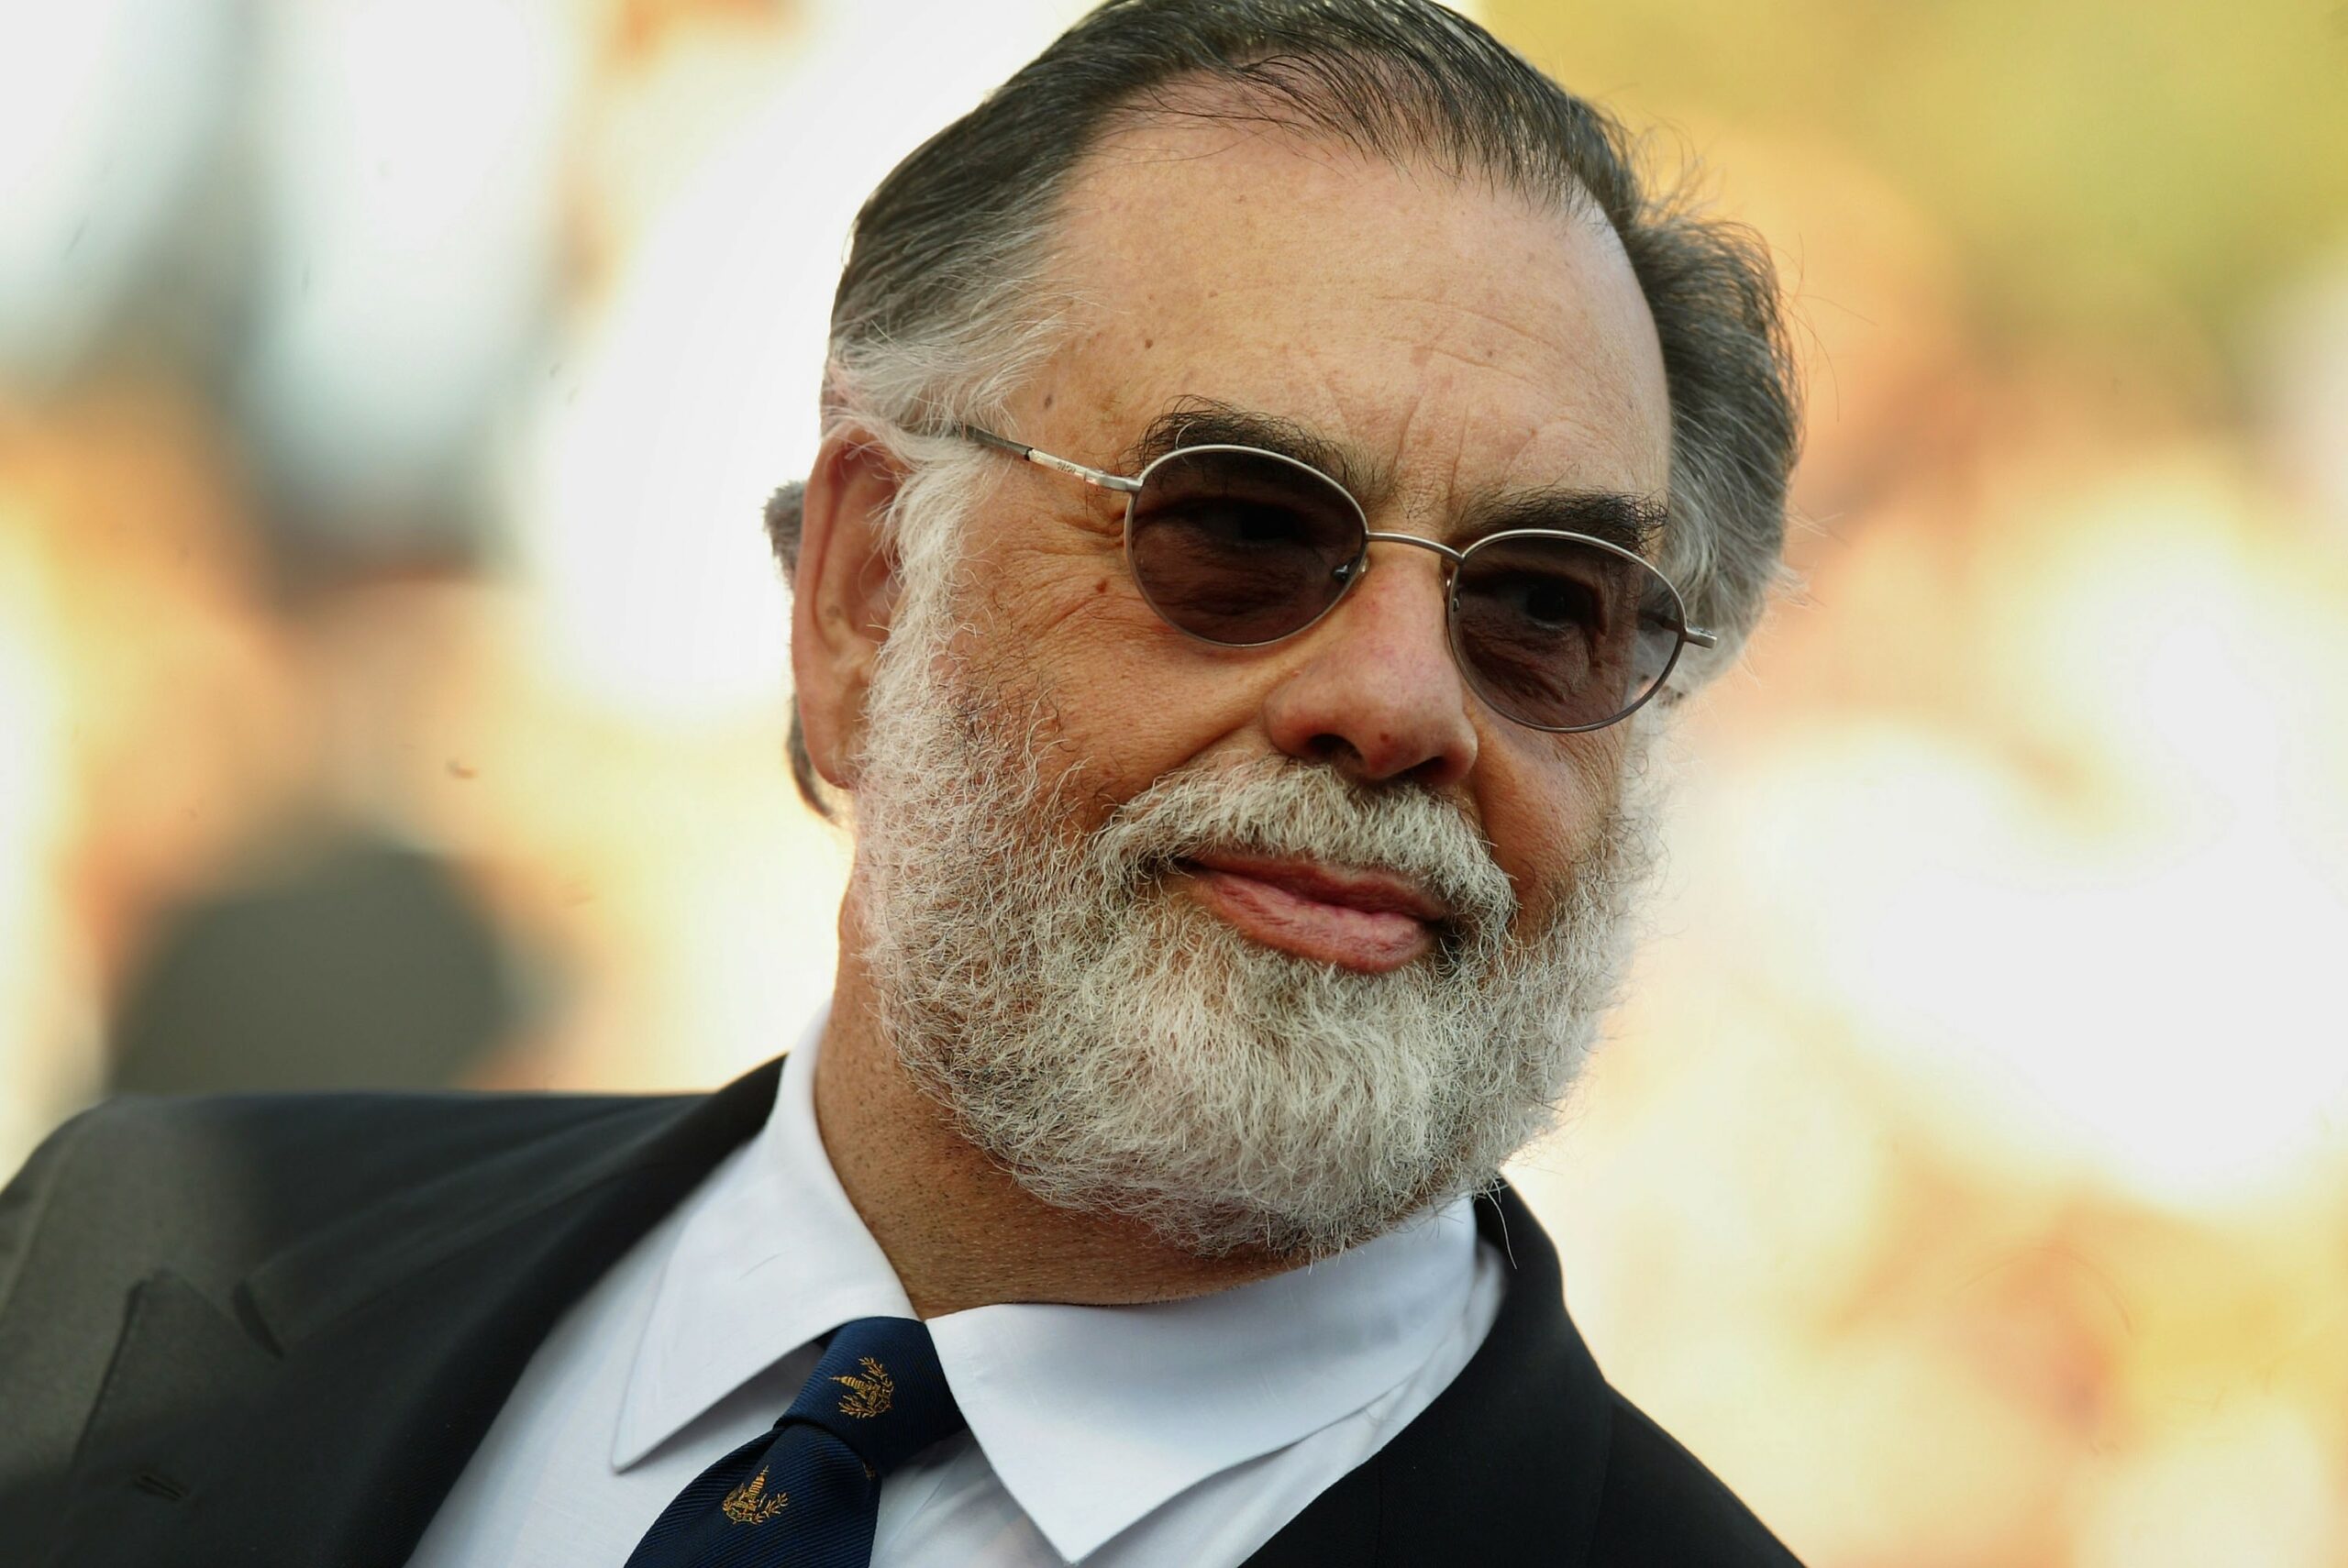 Is Francis Ford Coppola a billionaire?